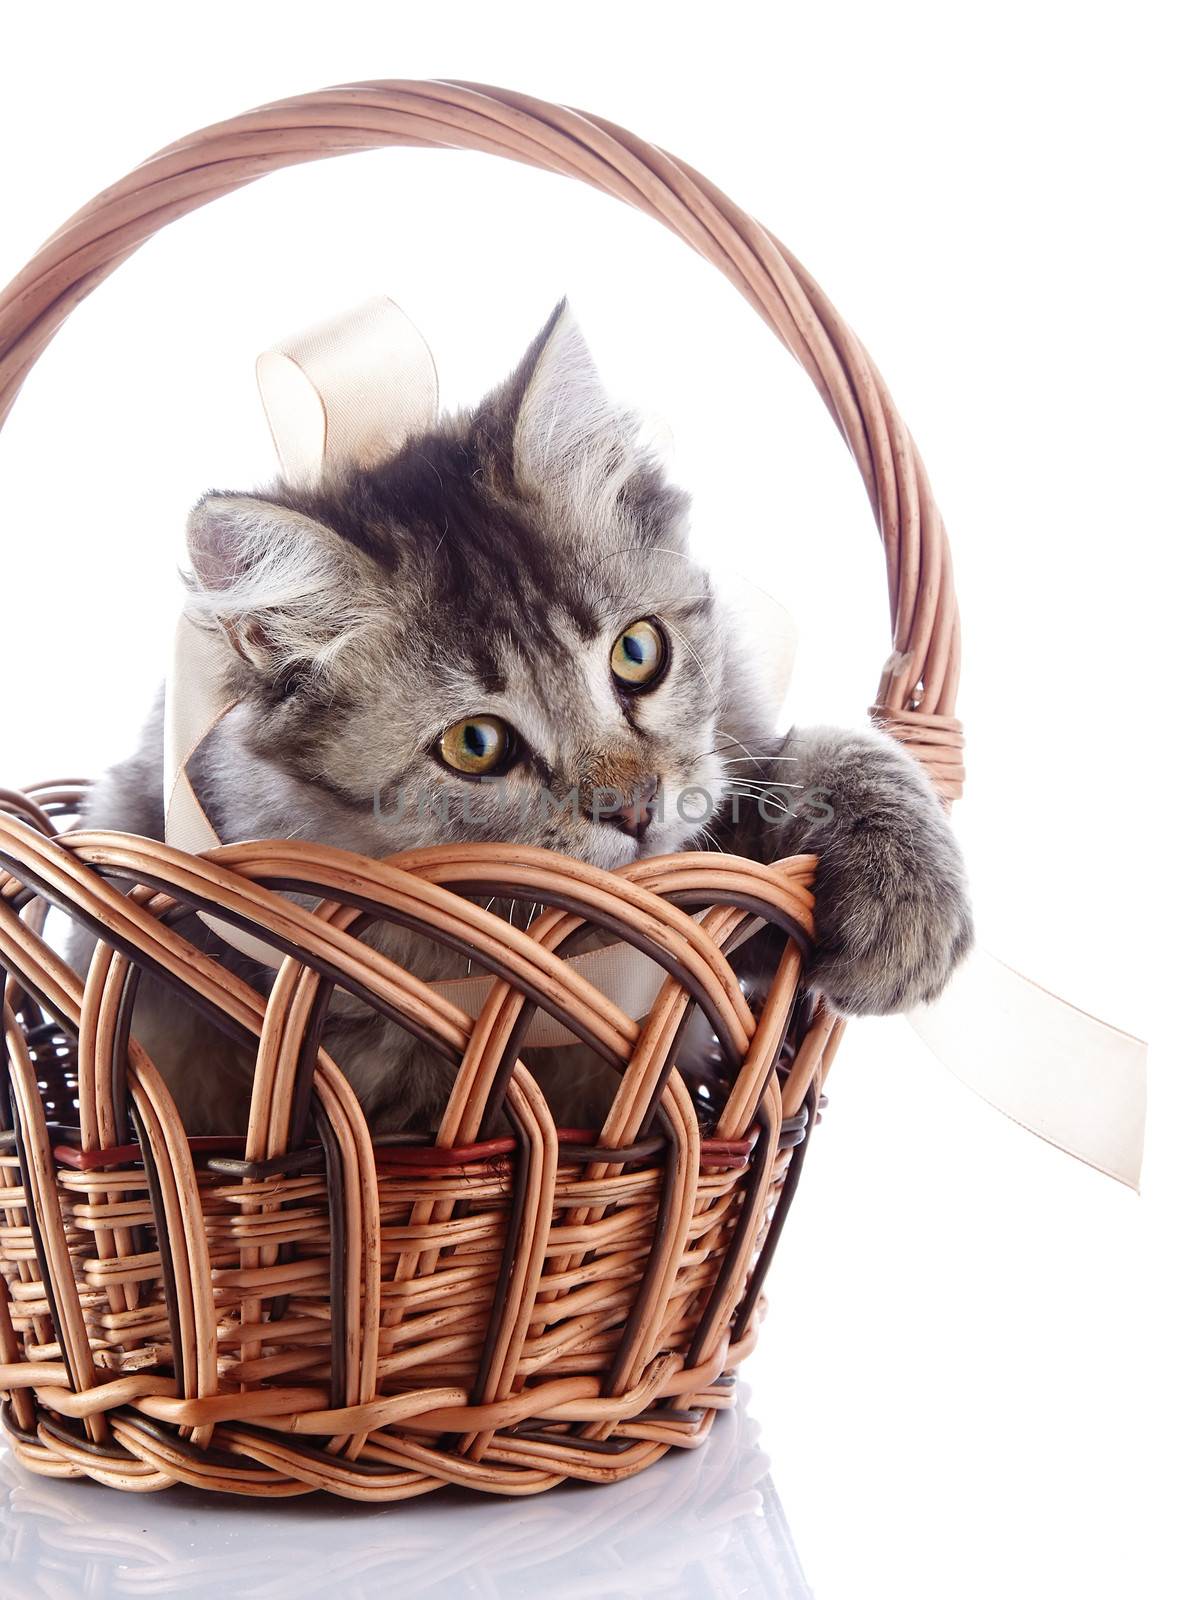 Cat in a wattled basket plays with a tape. Fluffy cat with yellow eyes.  Striped not purebred kitten. Kitten on a white background. Small predator. Small cat.